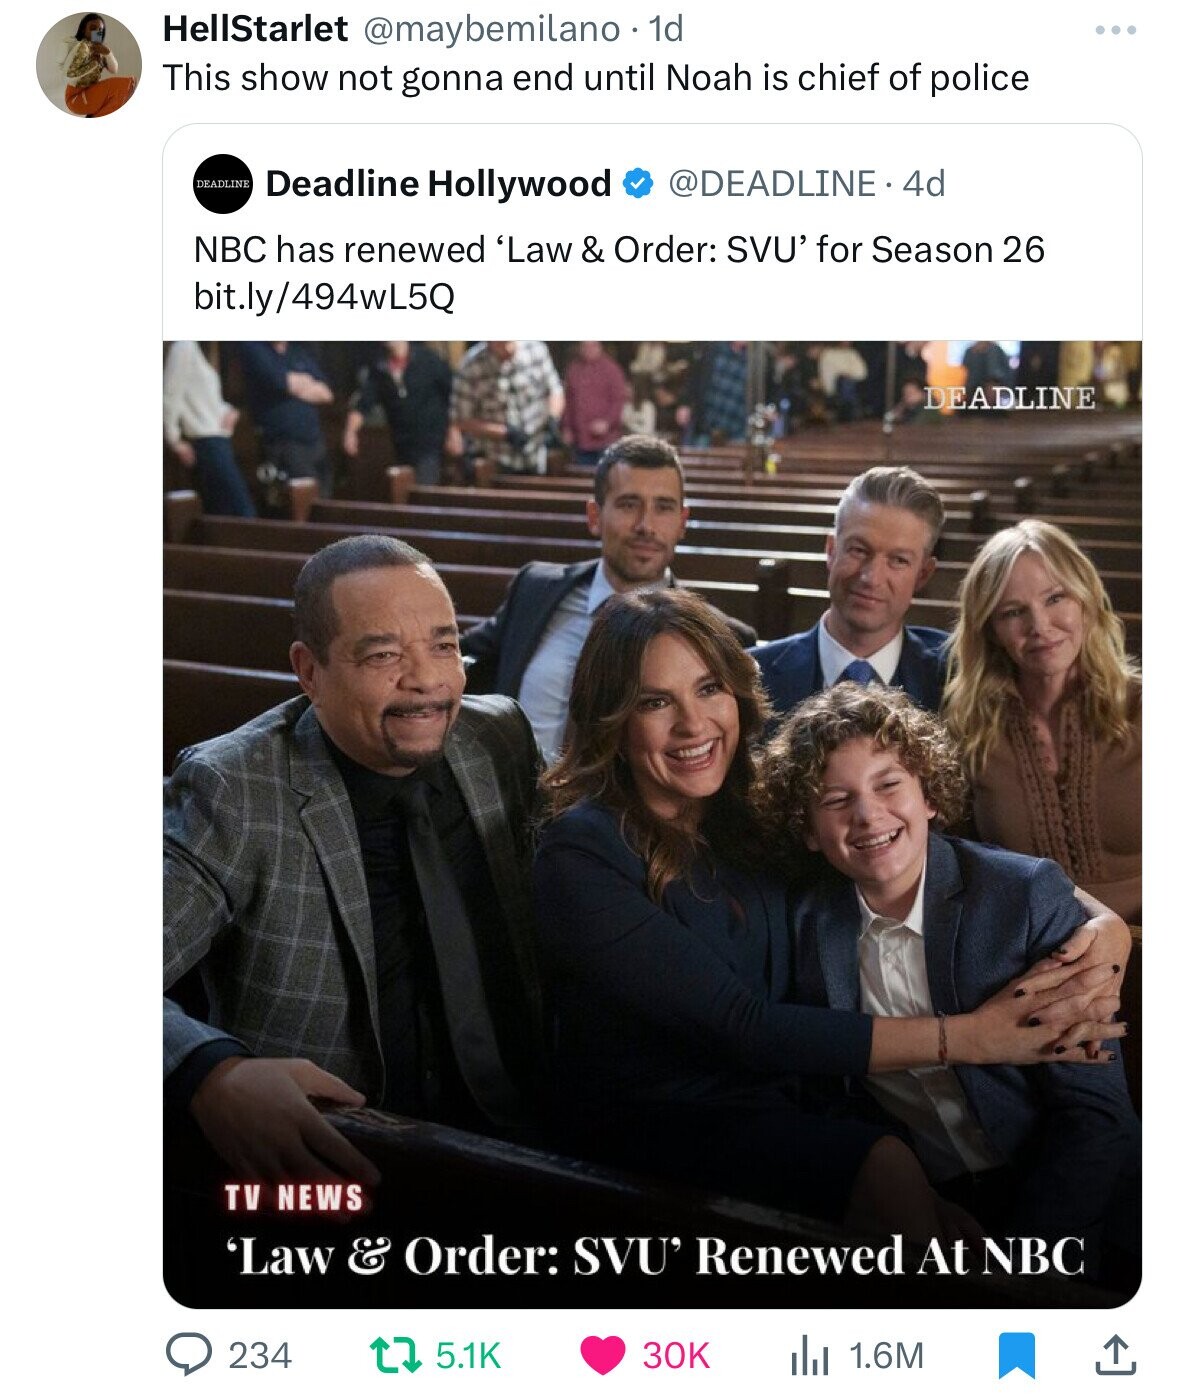 HellStarlet @maybemilano 1d This show not gonna end until Noah is chief of police DEADLINE Deadline Hollywood @DEADLINE. 4d NBC has renewed 'Law & Order: SVU' for Season 26 bit.ly/494wL5Q DEADLINE TV NEWS 'Law & Order: SVU' Renewed At NBC 234 5.1K 30K 1.6M 